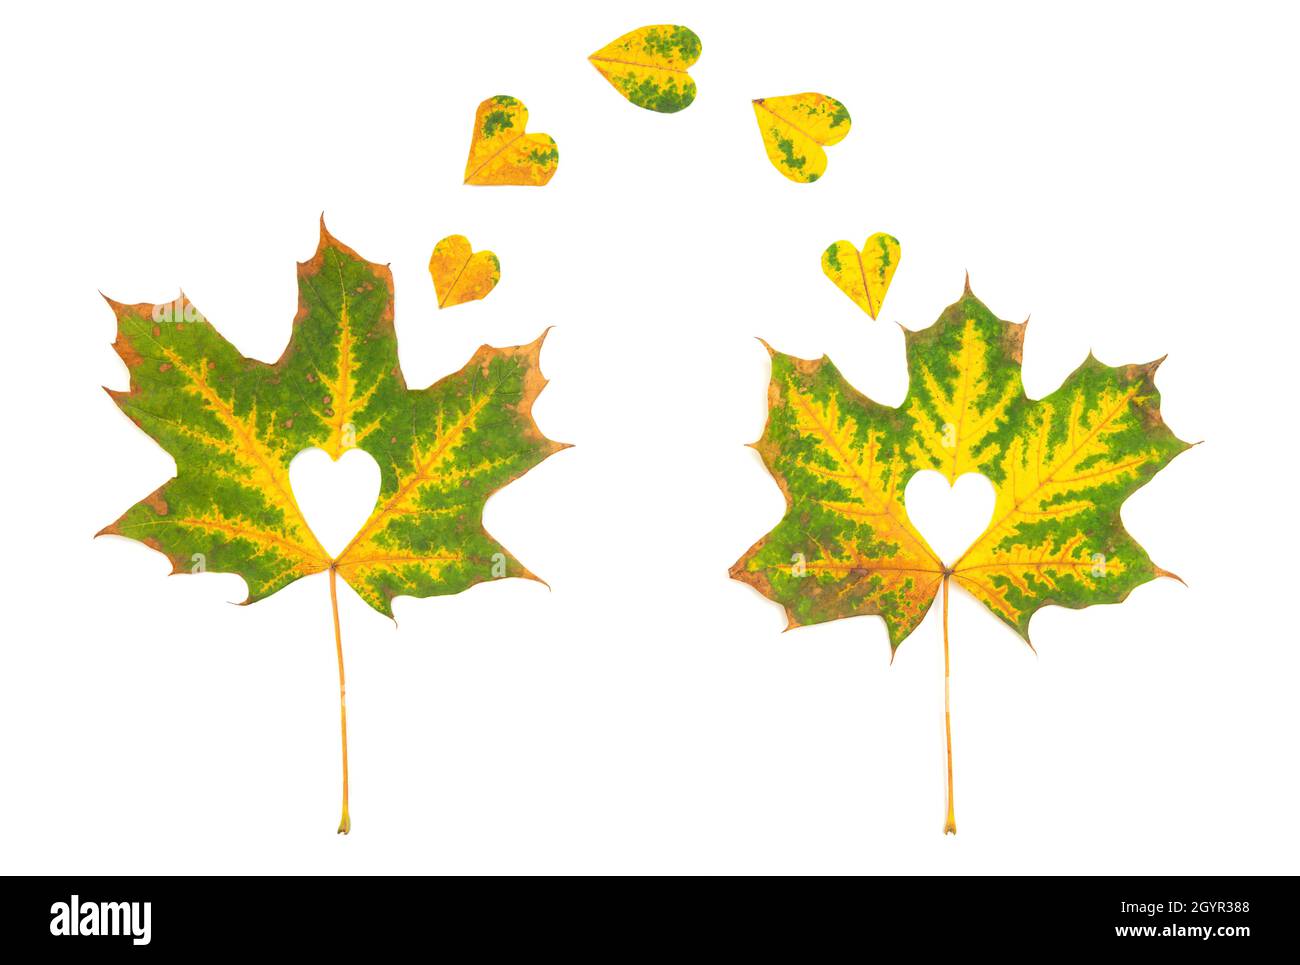 Two maple leaves with cut out heart shapes isolated on white. Romantic autumn concept. Stock Photo